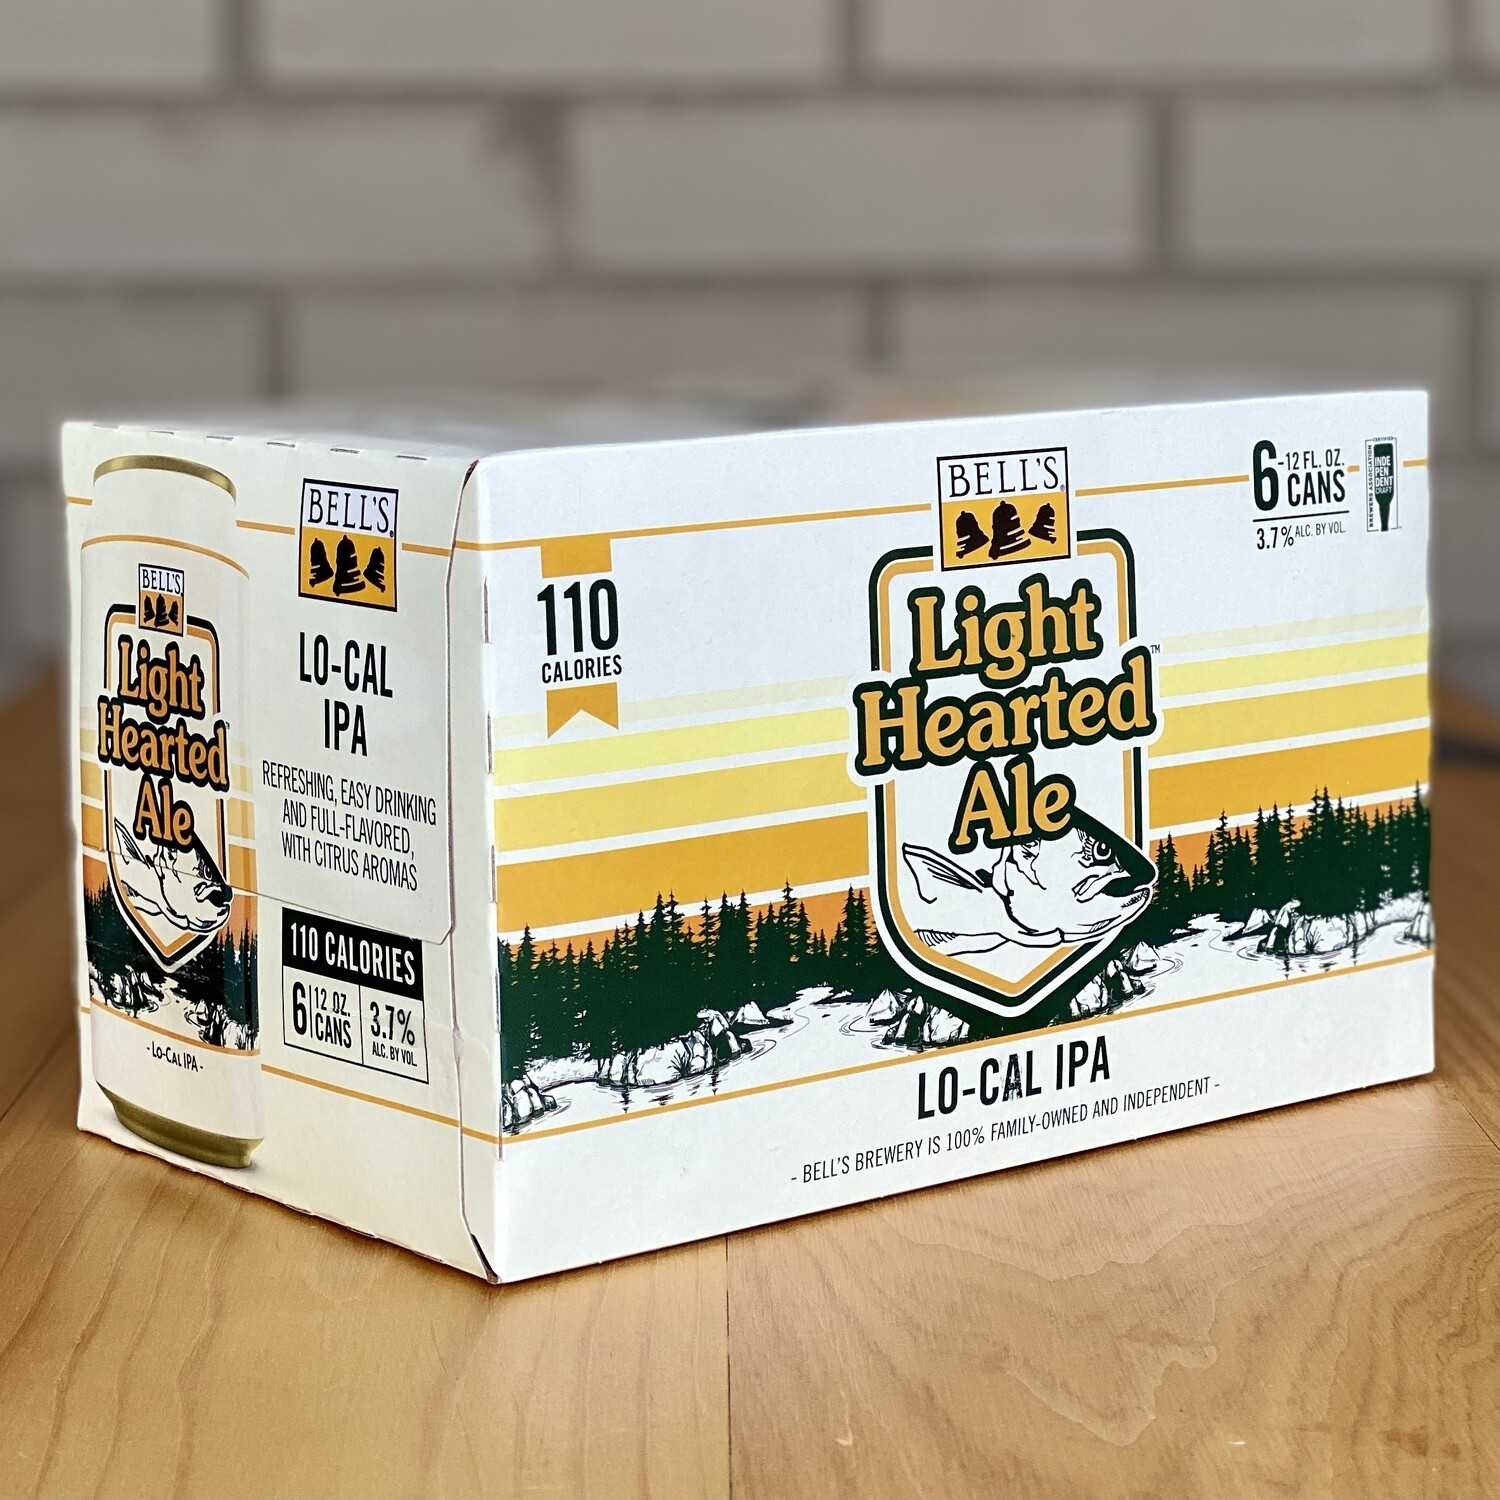 Bell's Light Hearted Ale (6pk)